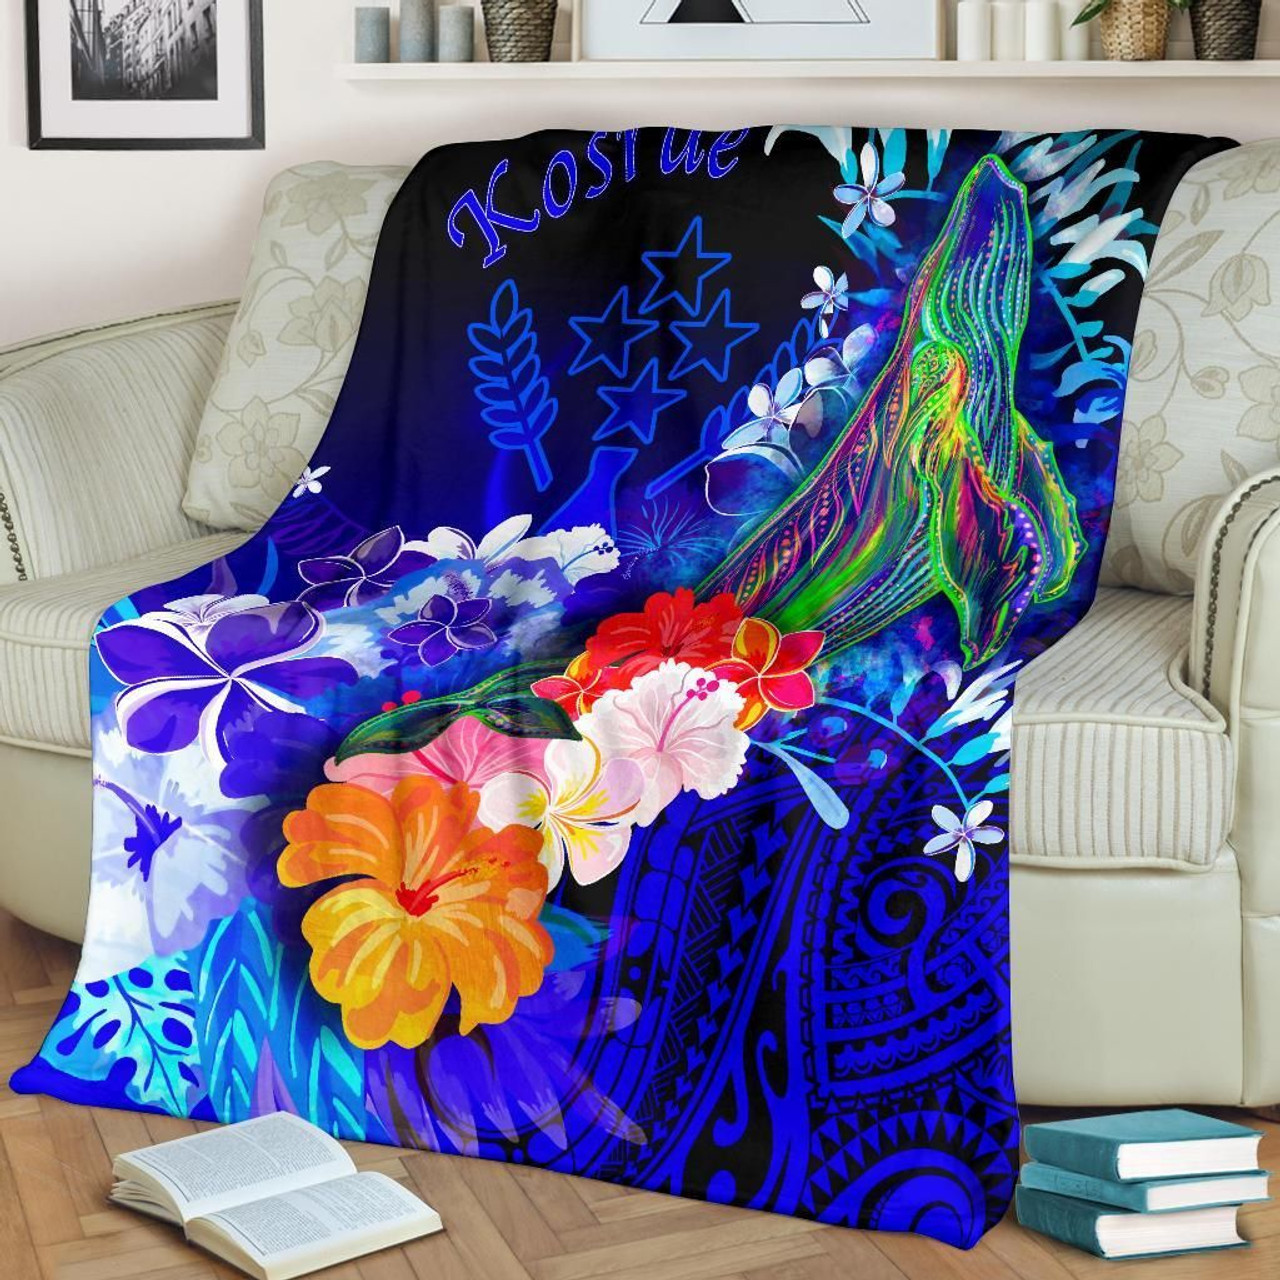 Kosrae Premium Blanket - Humpback Whale with Tropical Flowers (Blue) 2